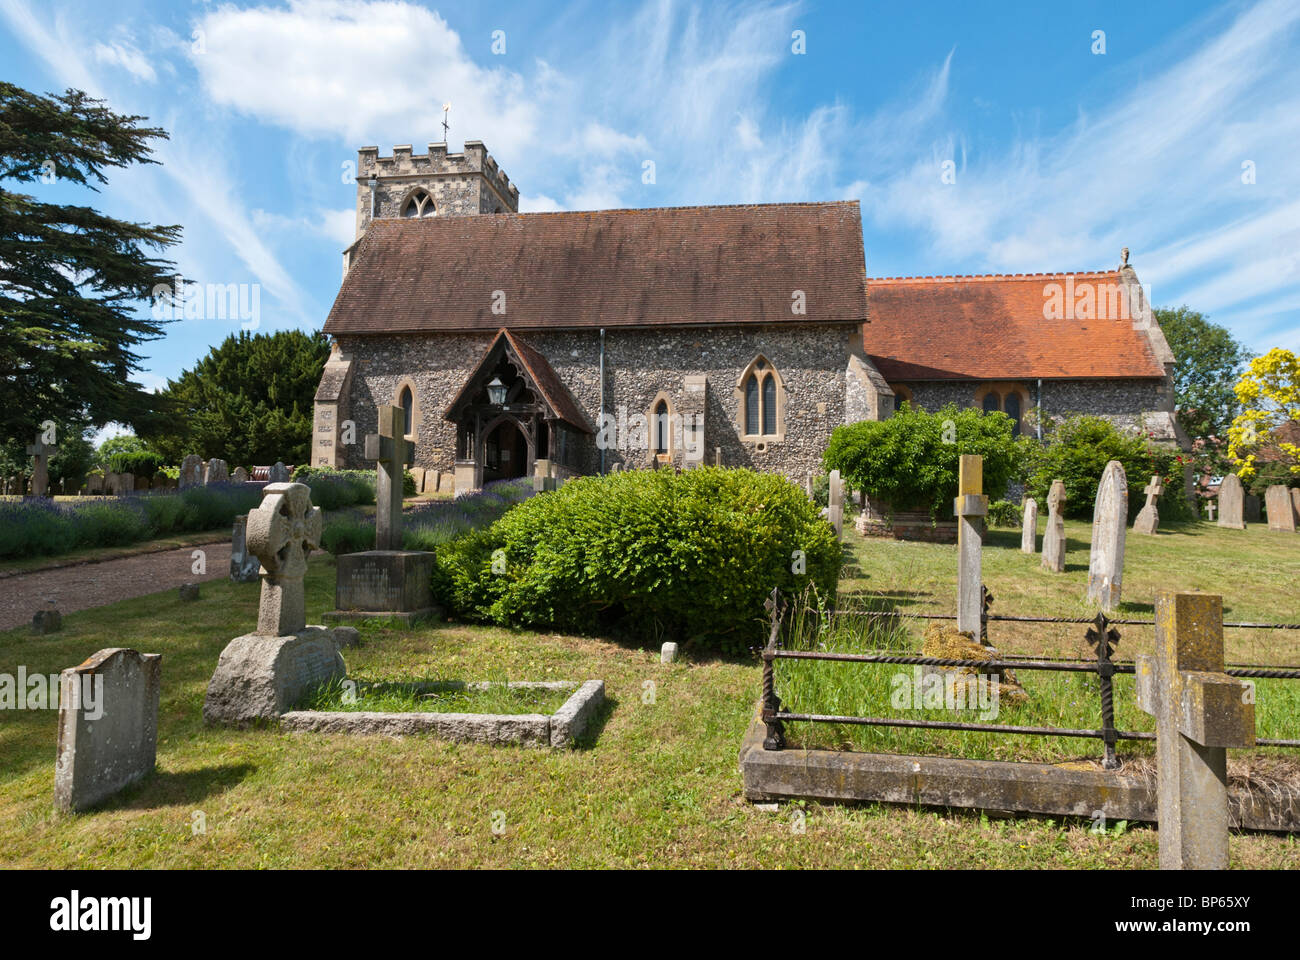 A beautifully located church not far from the banks of the Thames. Alfred Lord Tennyson was married here. Stock Photo